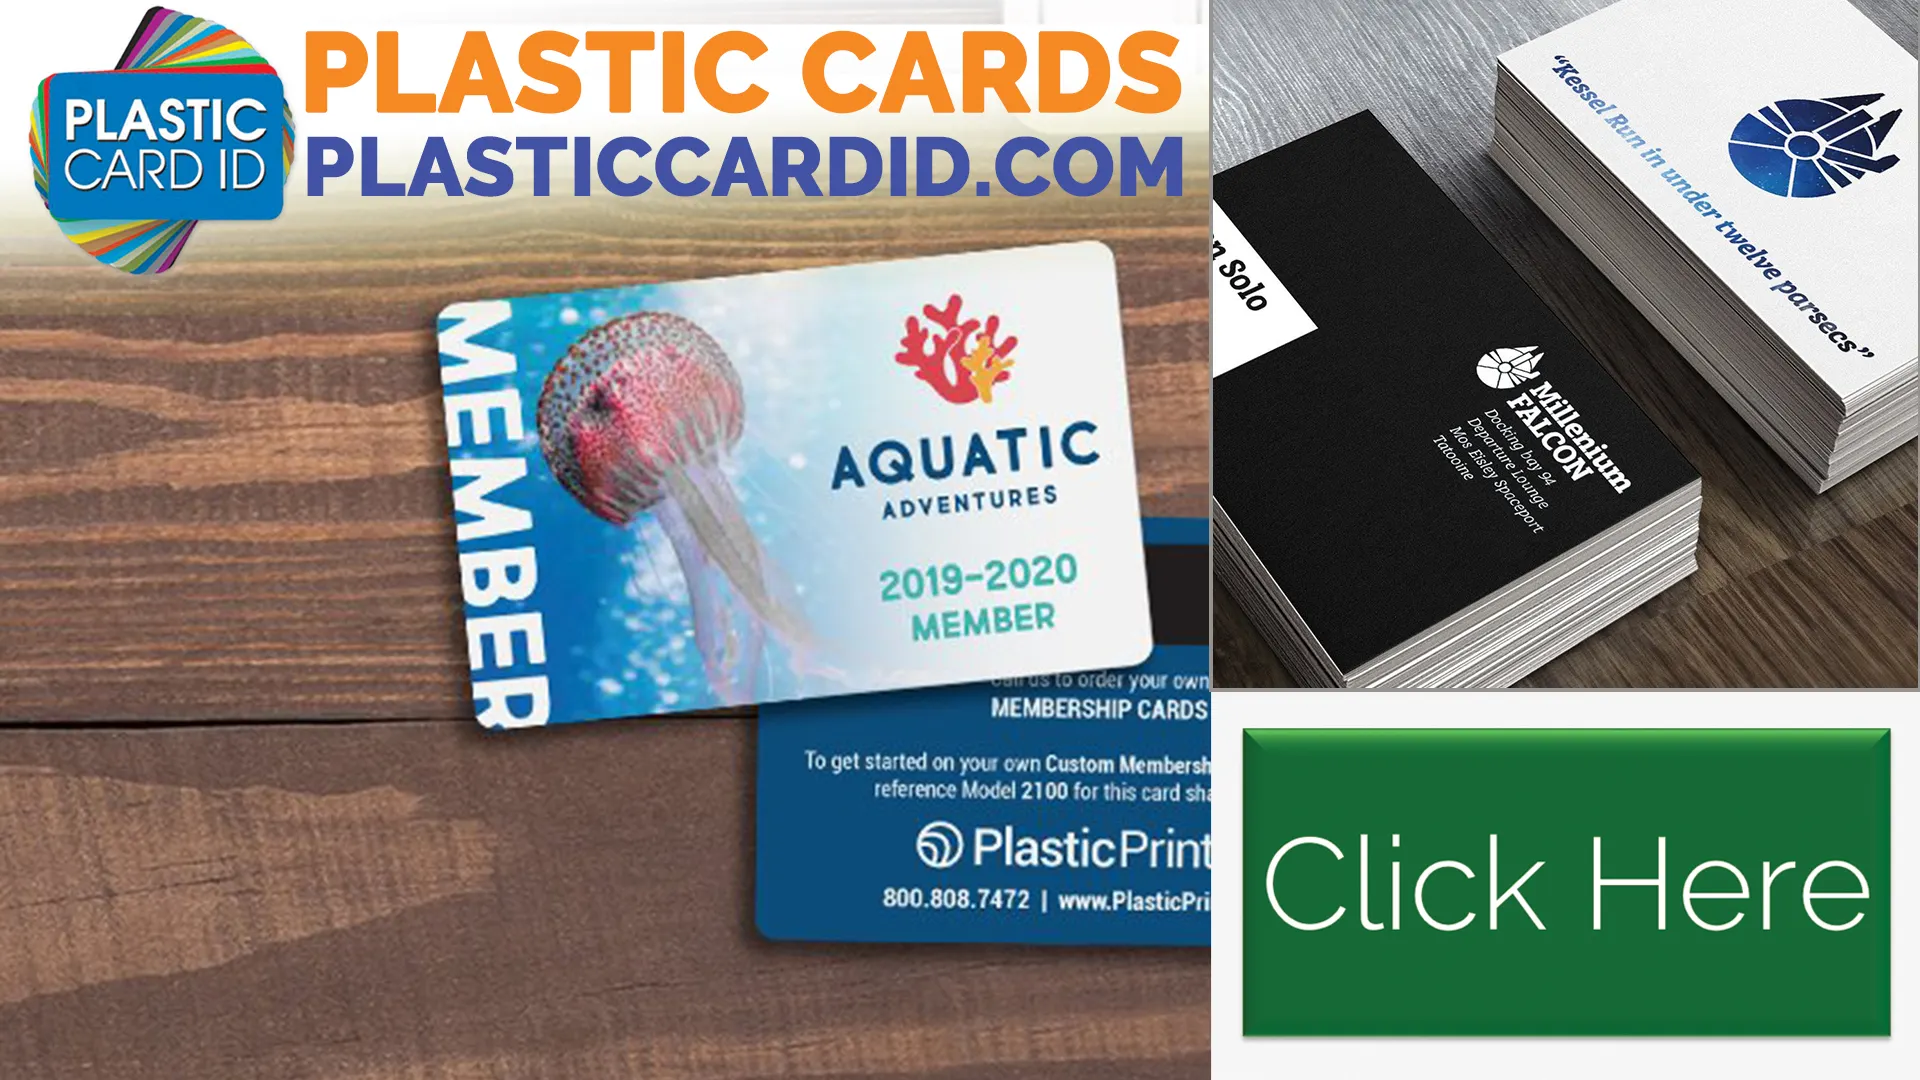 Why PCID



 Should Be Your Go-To Plastic Card Partner